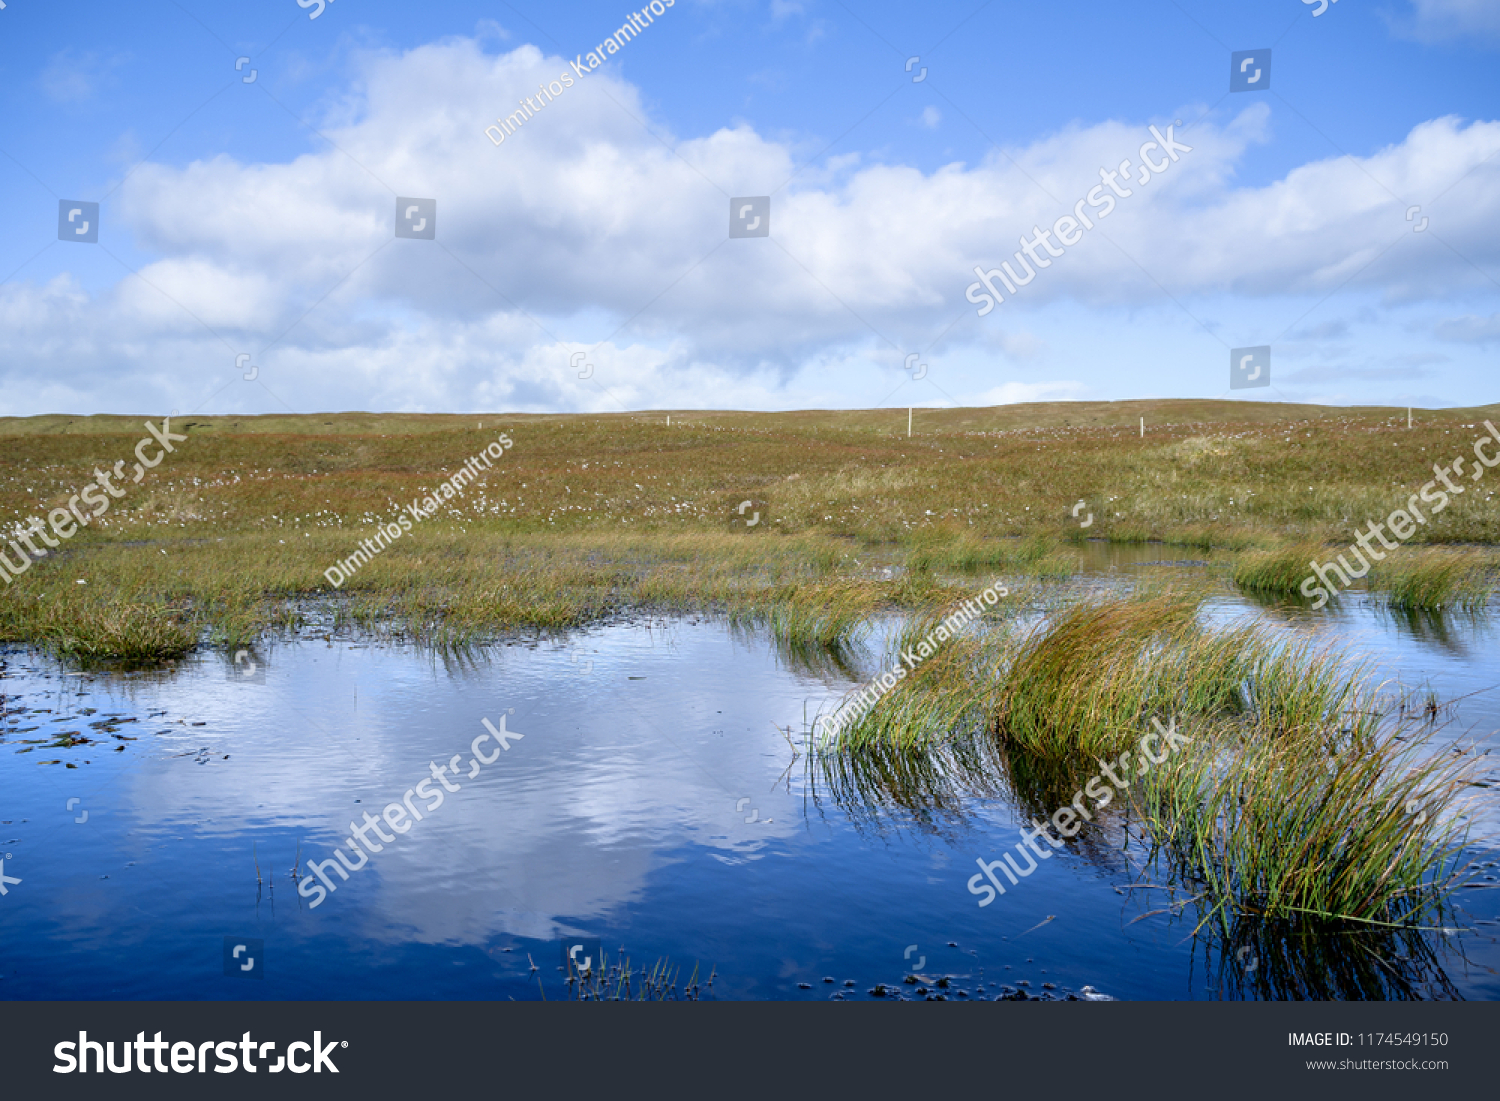 Reflections in a small pond, Nolsoy, Faroe Islands #1174549150